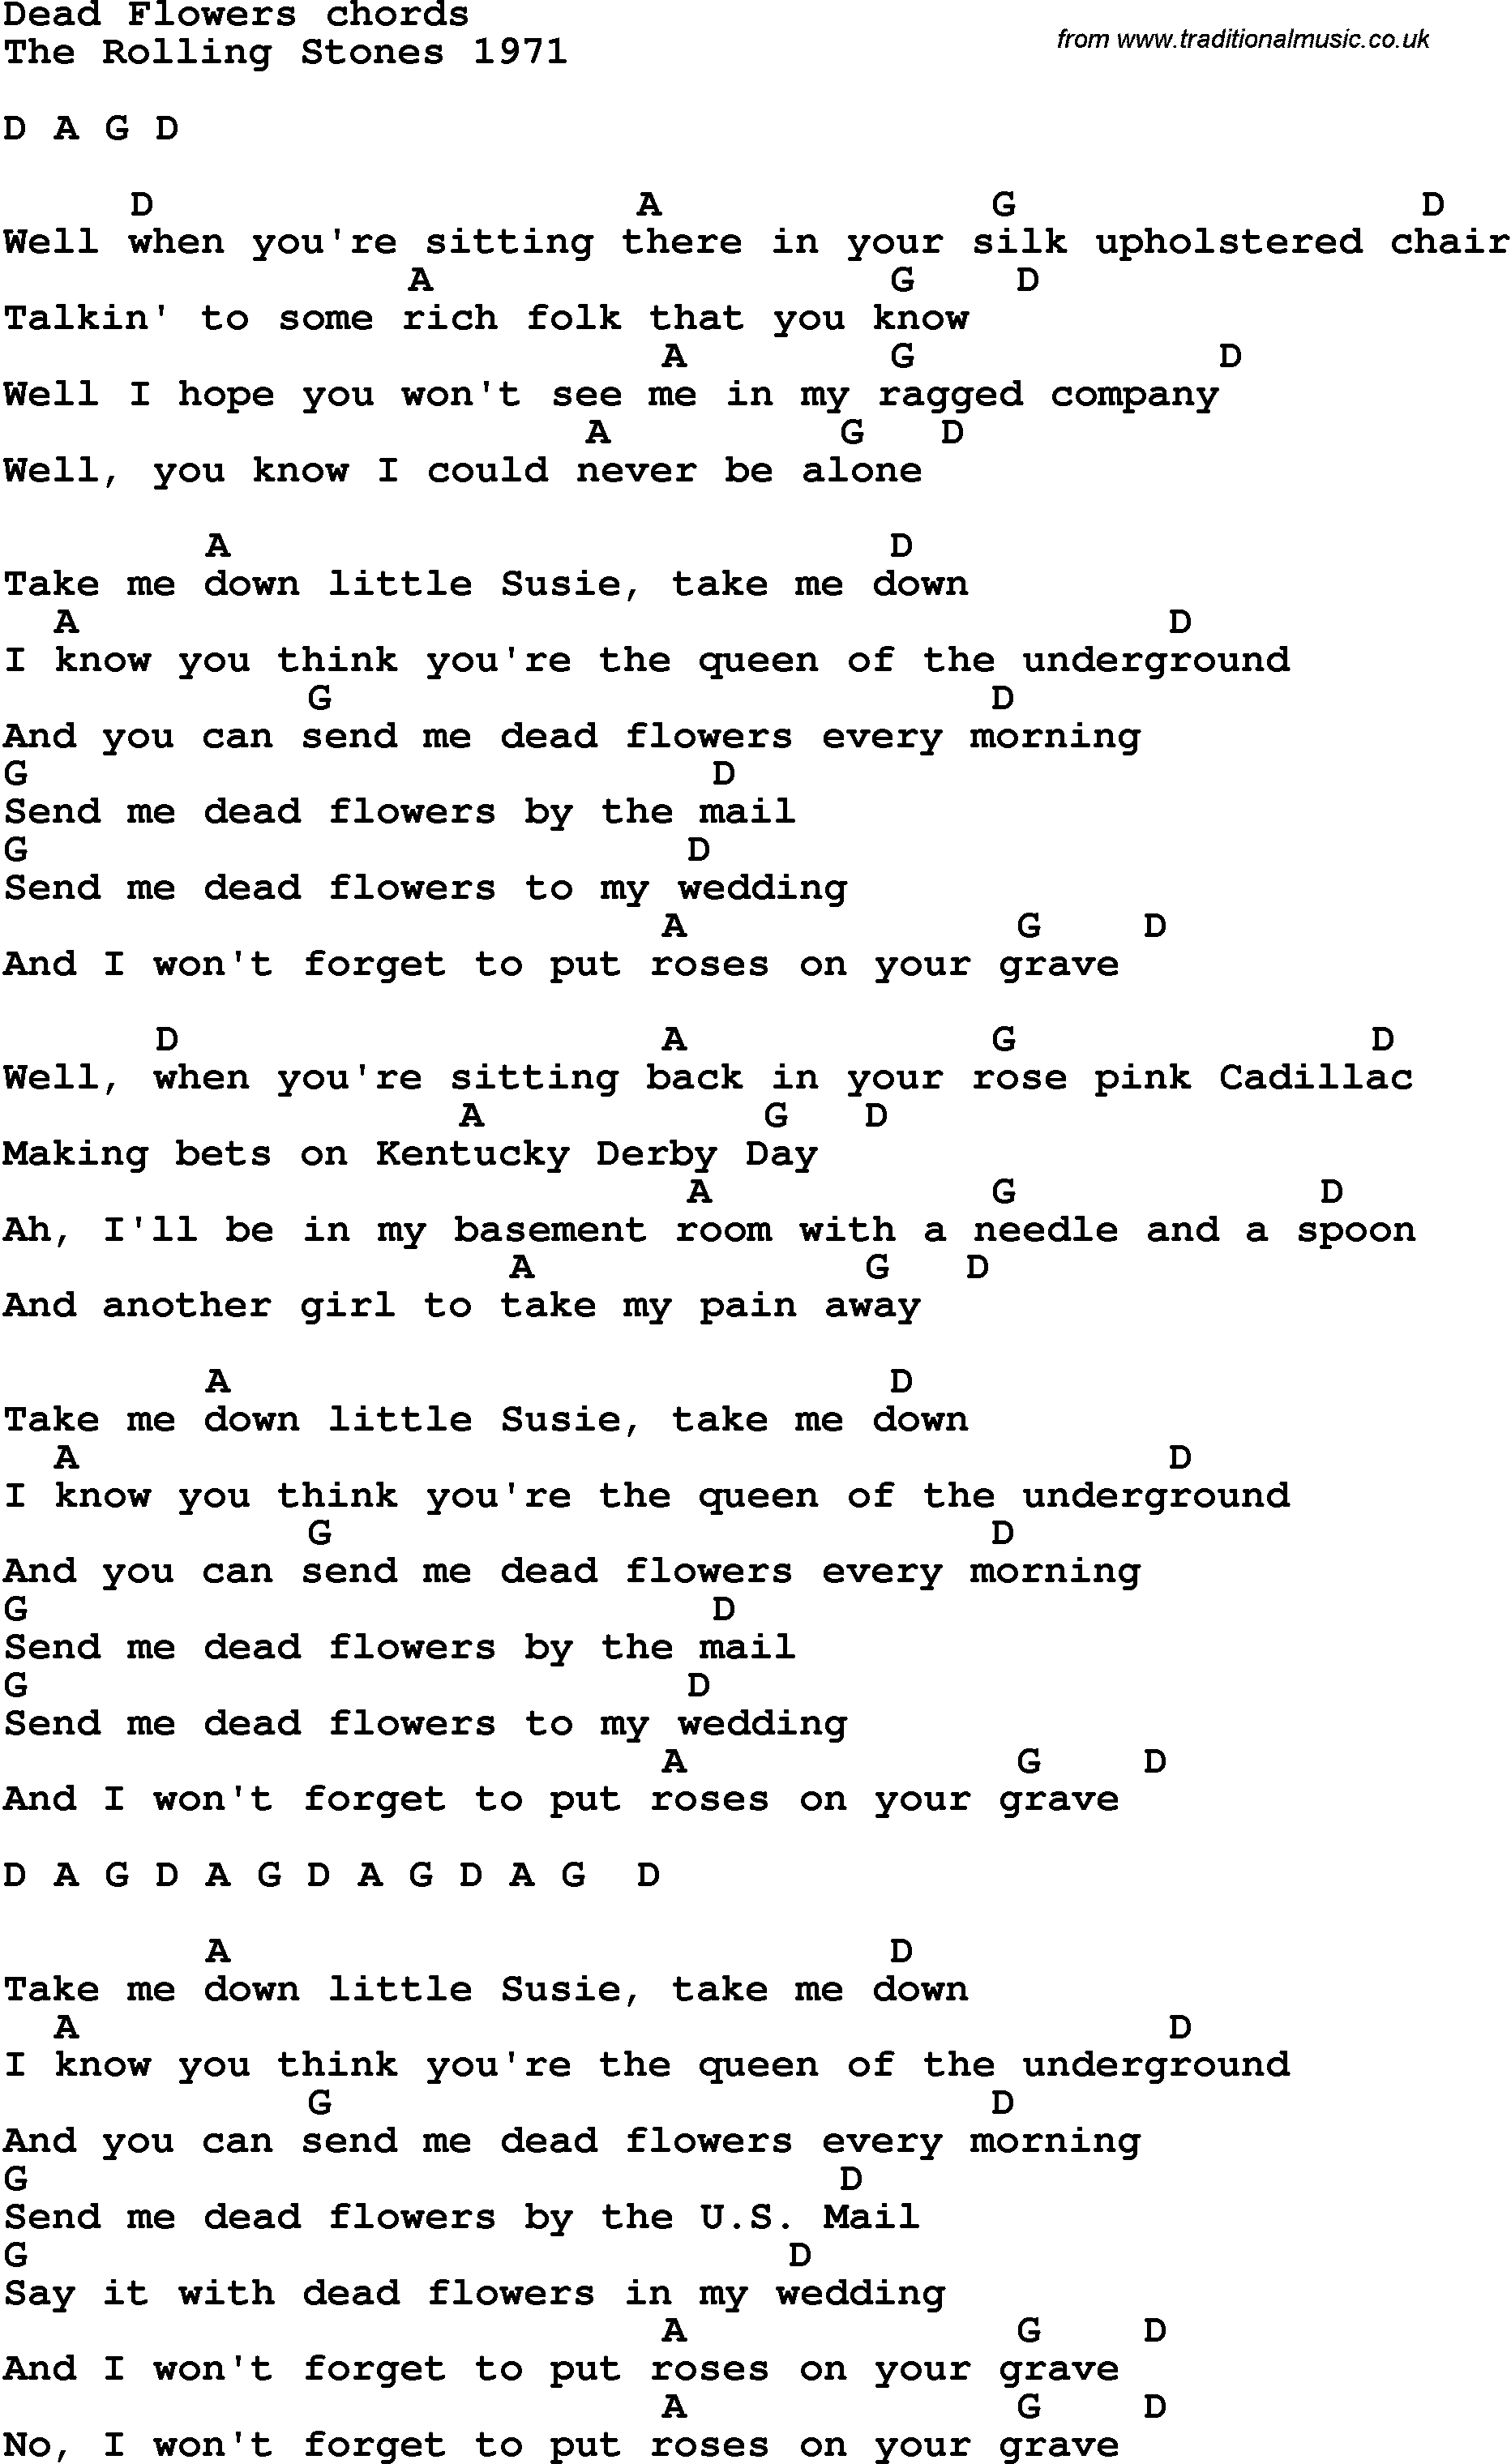 Song Lyrics with guitar chords for Dead Flowers